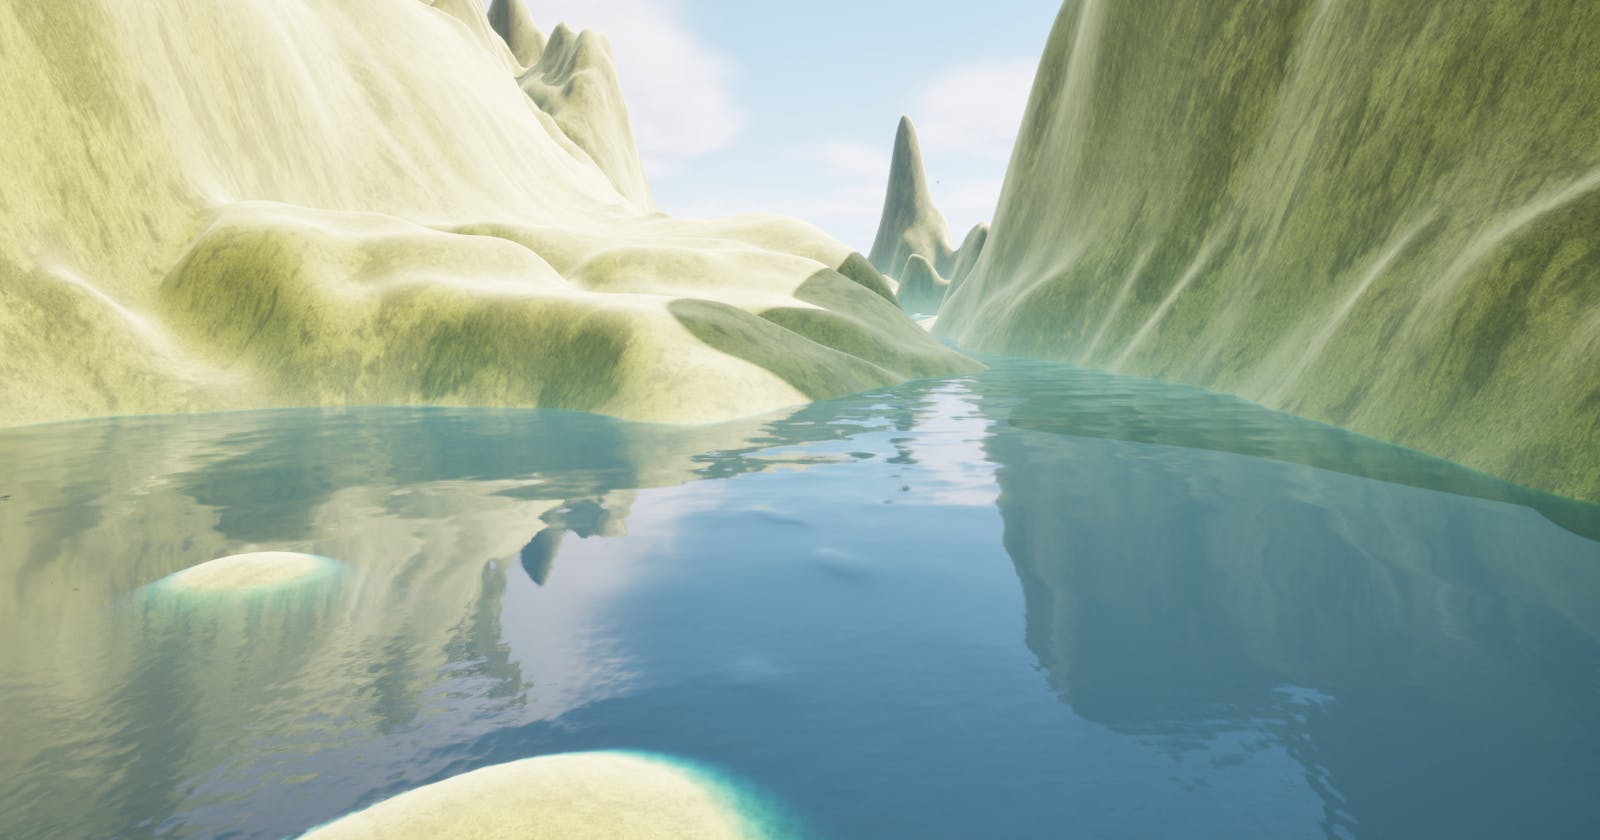 How to Add a Lake in Unreal Engine